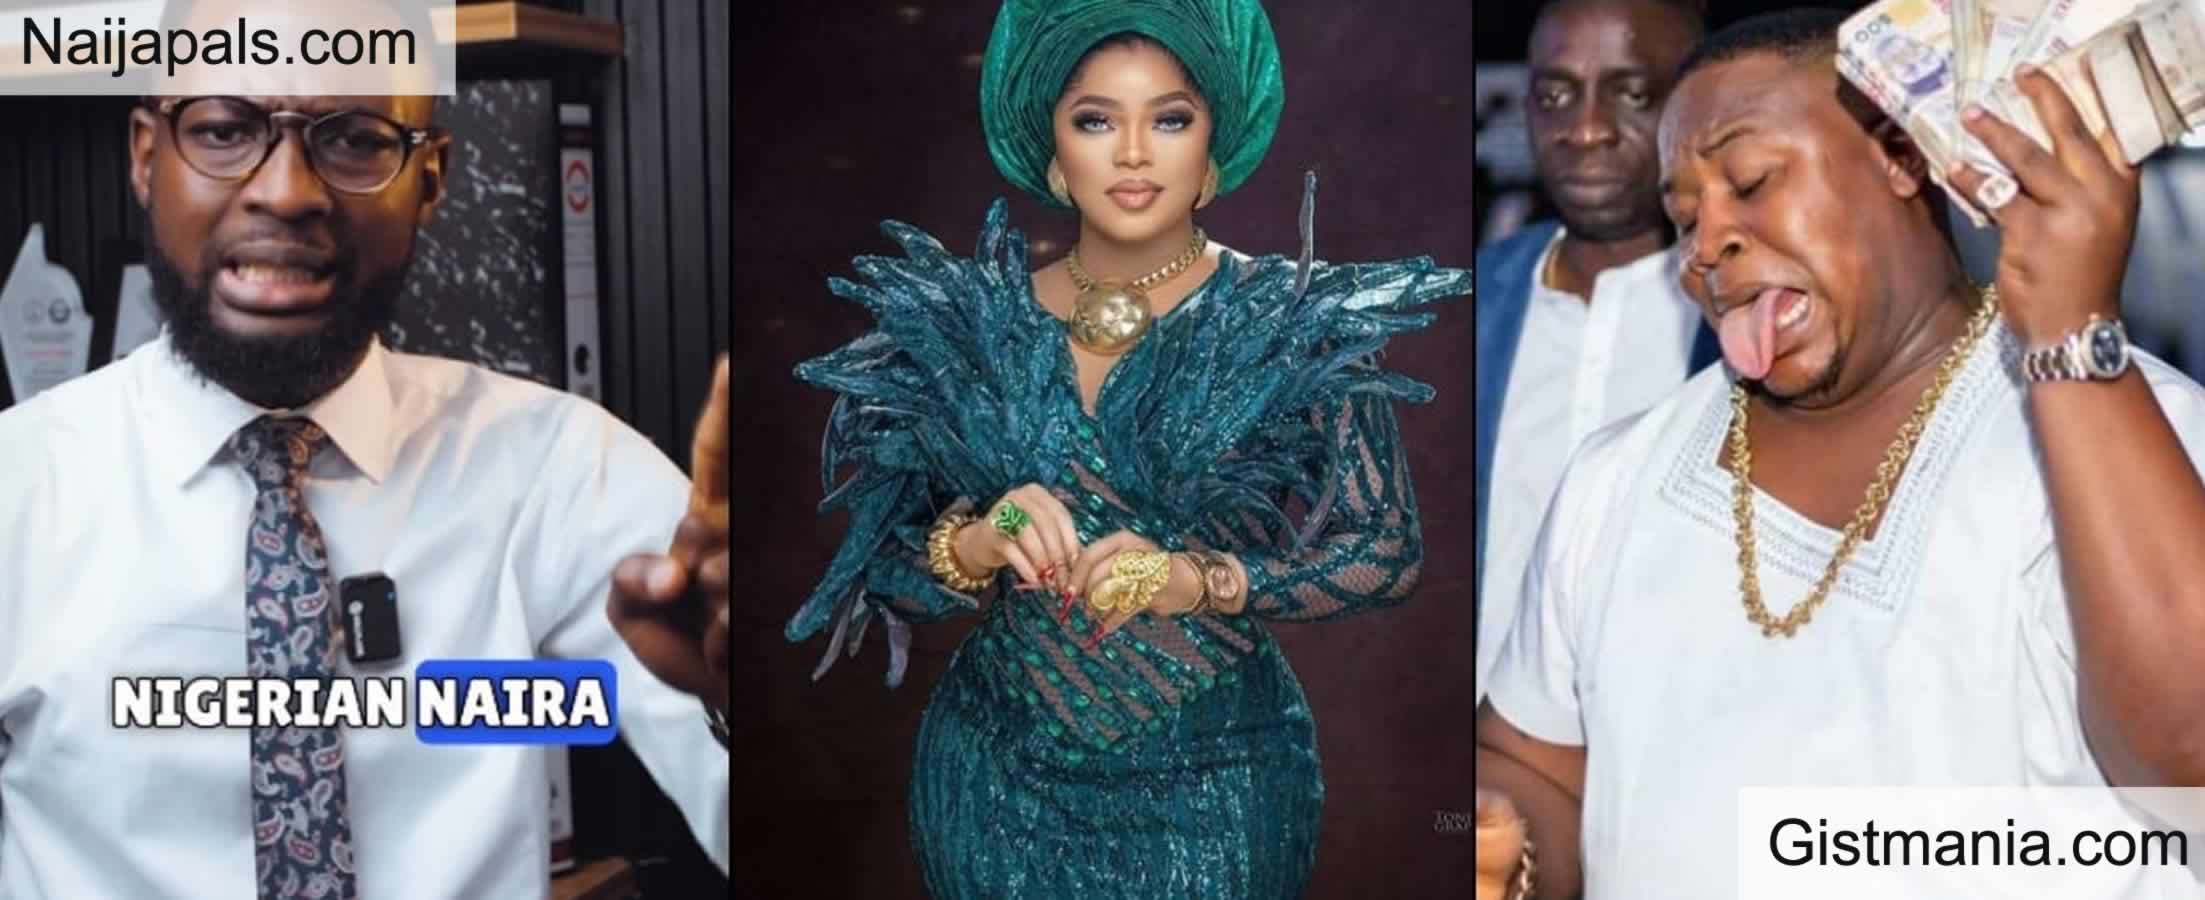 Bobrisky Jailed, Cubana Chief Priest Granted Bail For Same Offense – Timi Agbaje Clarifies